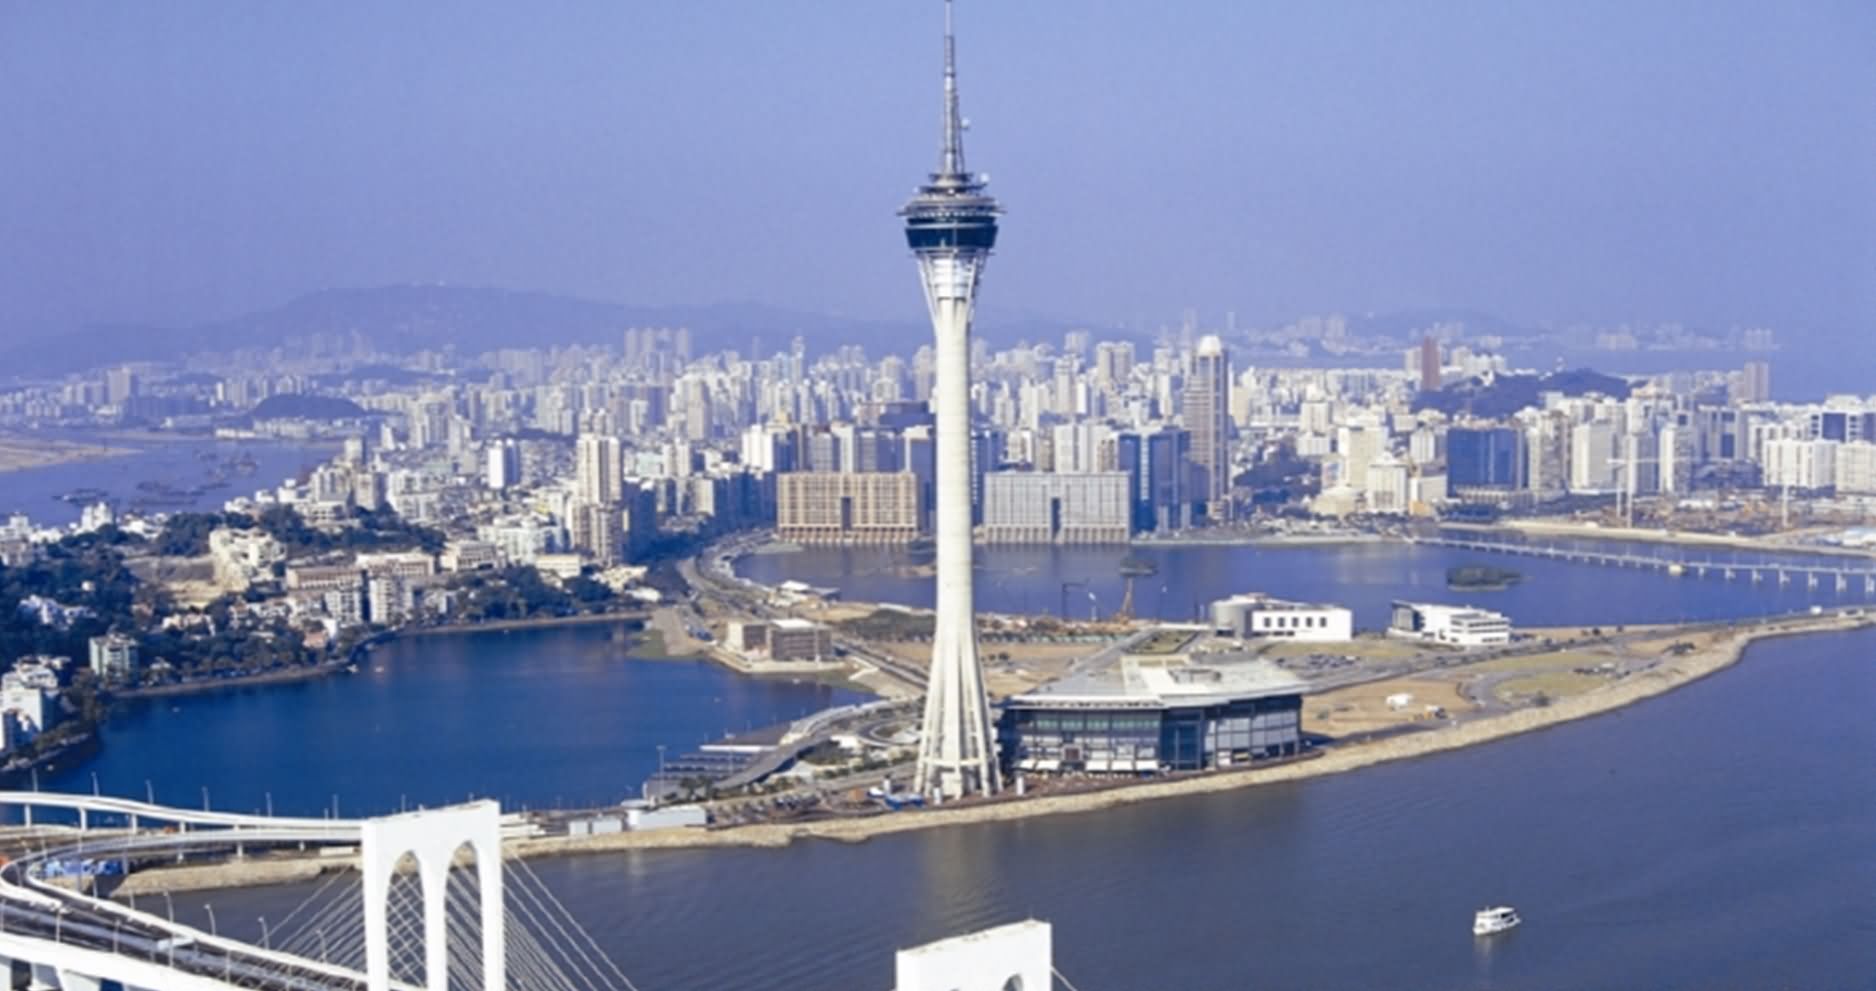 The Macau Tower And City View